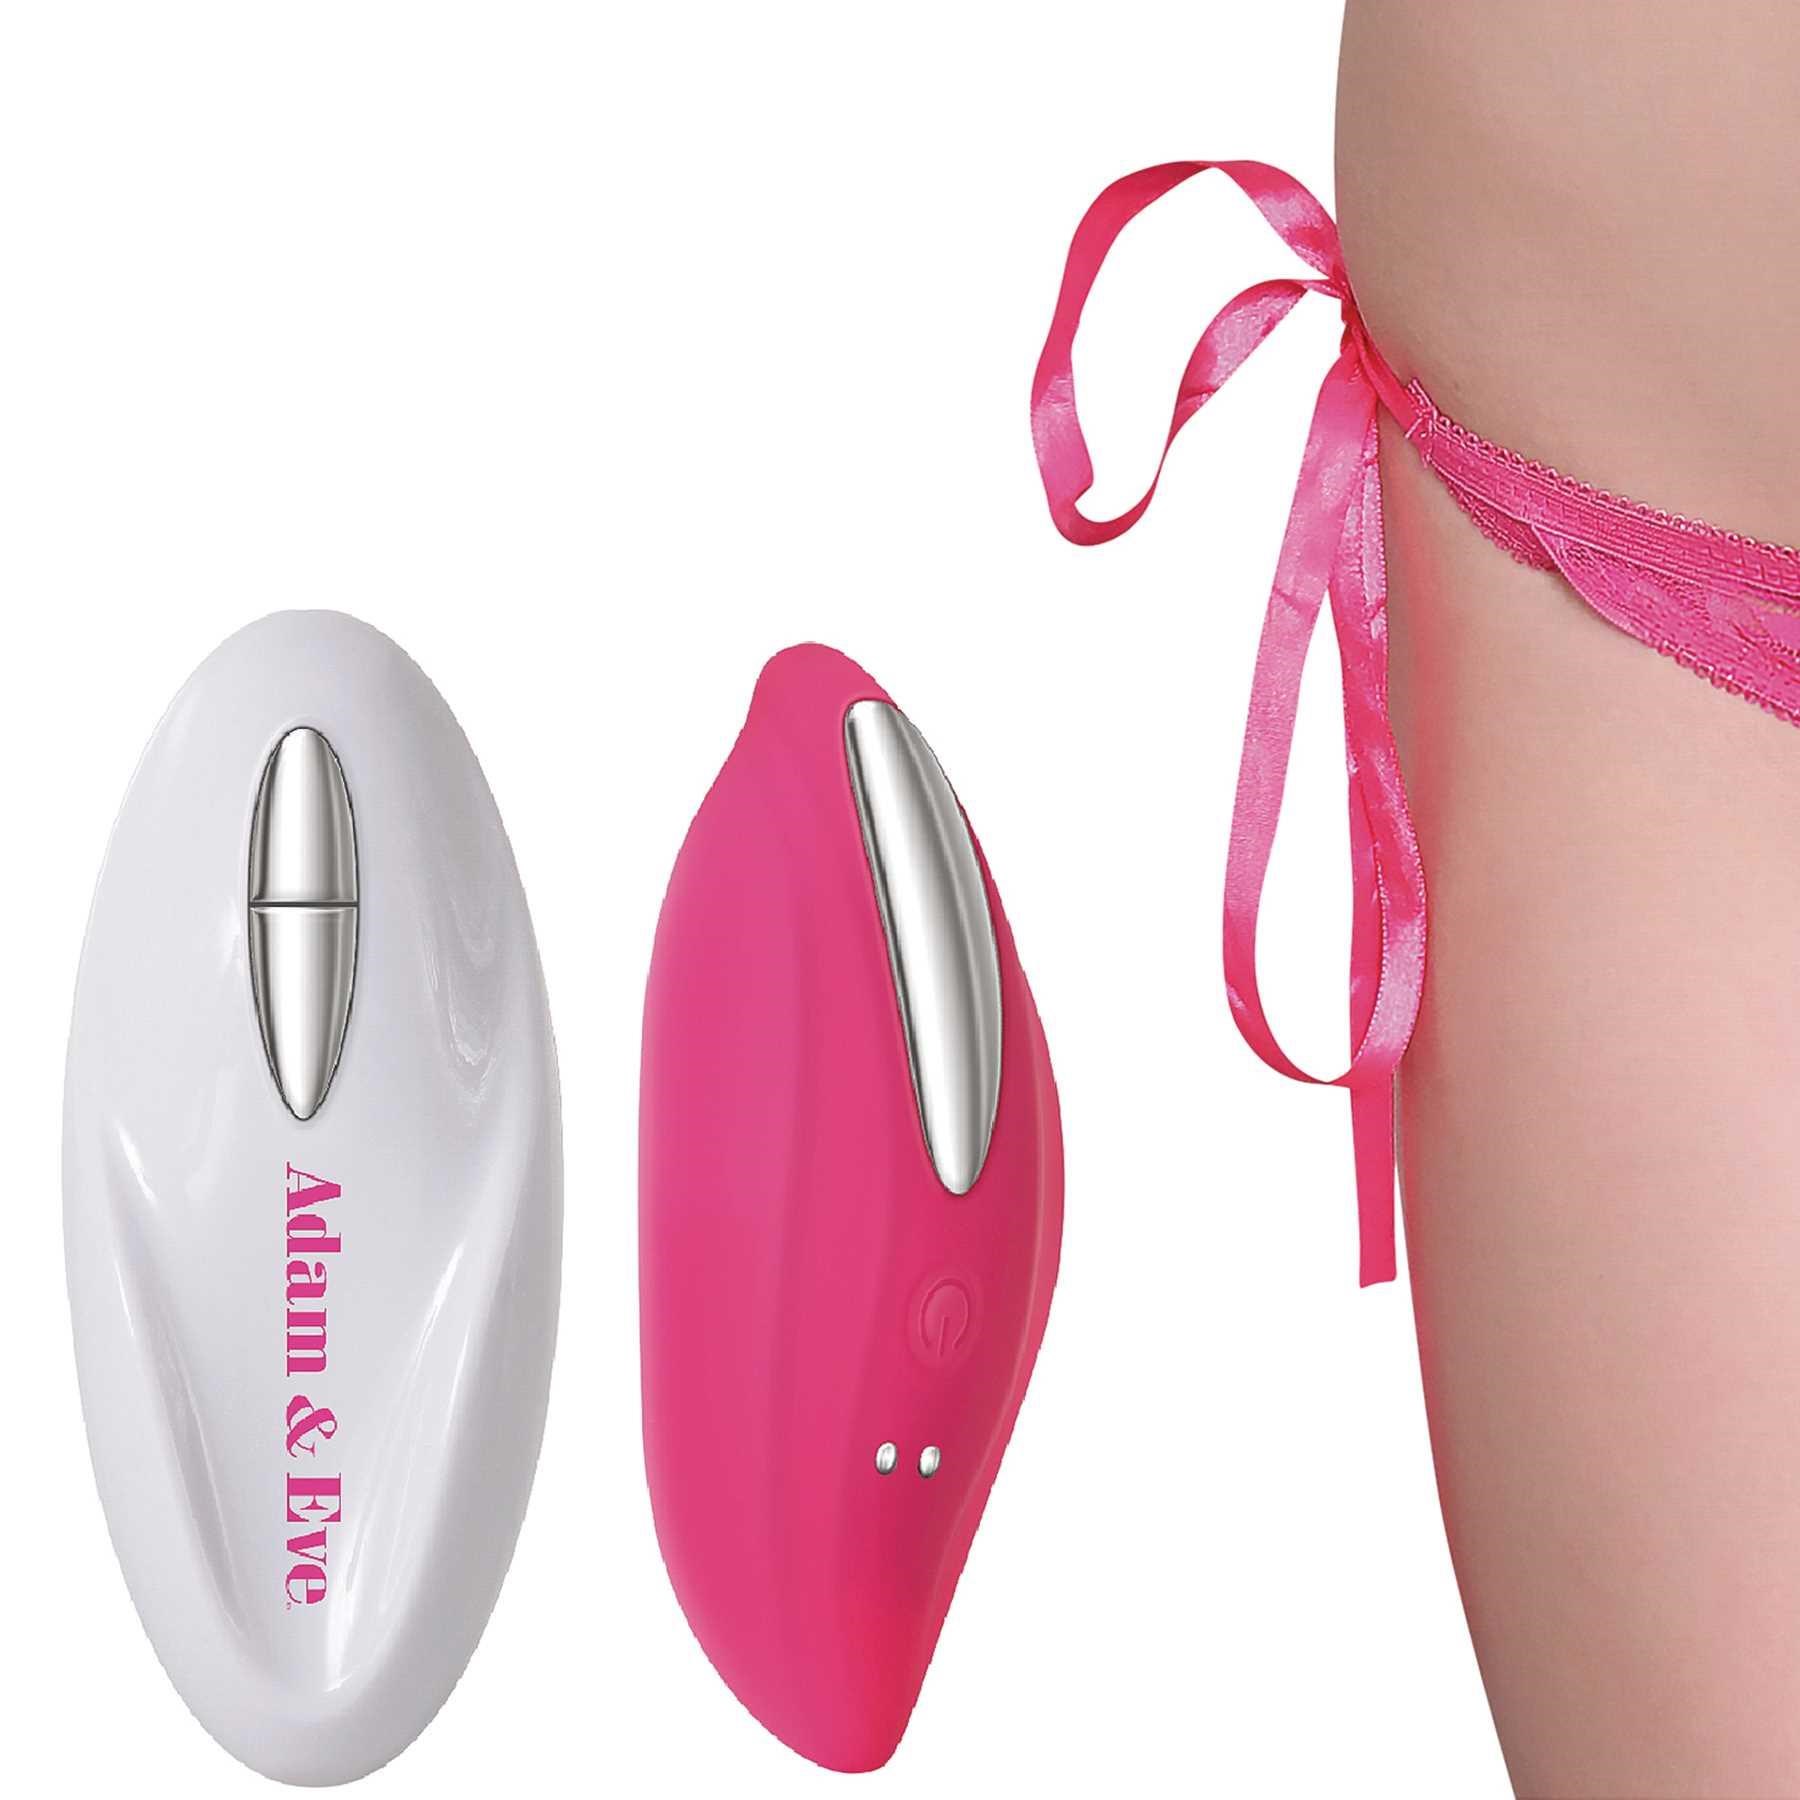 Eve's Rechargeable Vibrating Panty box